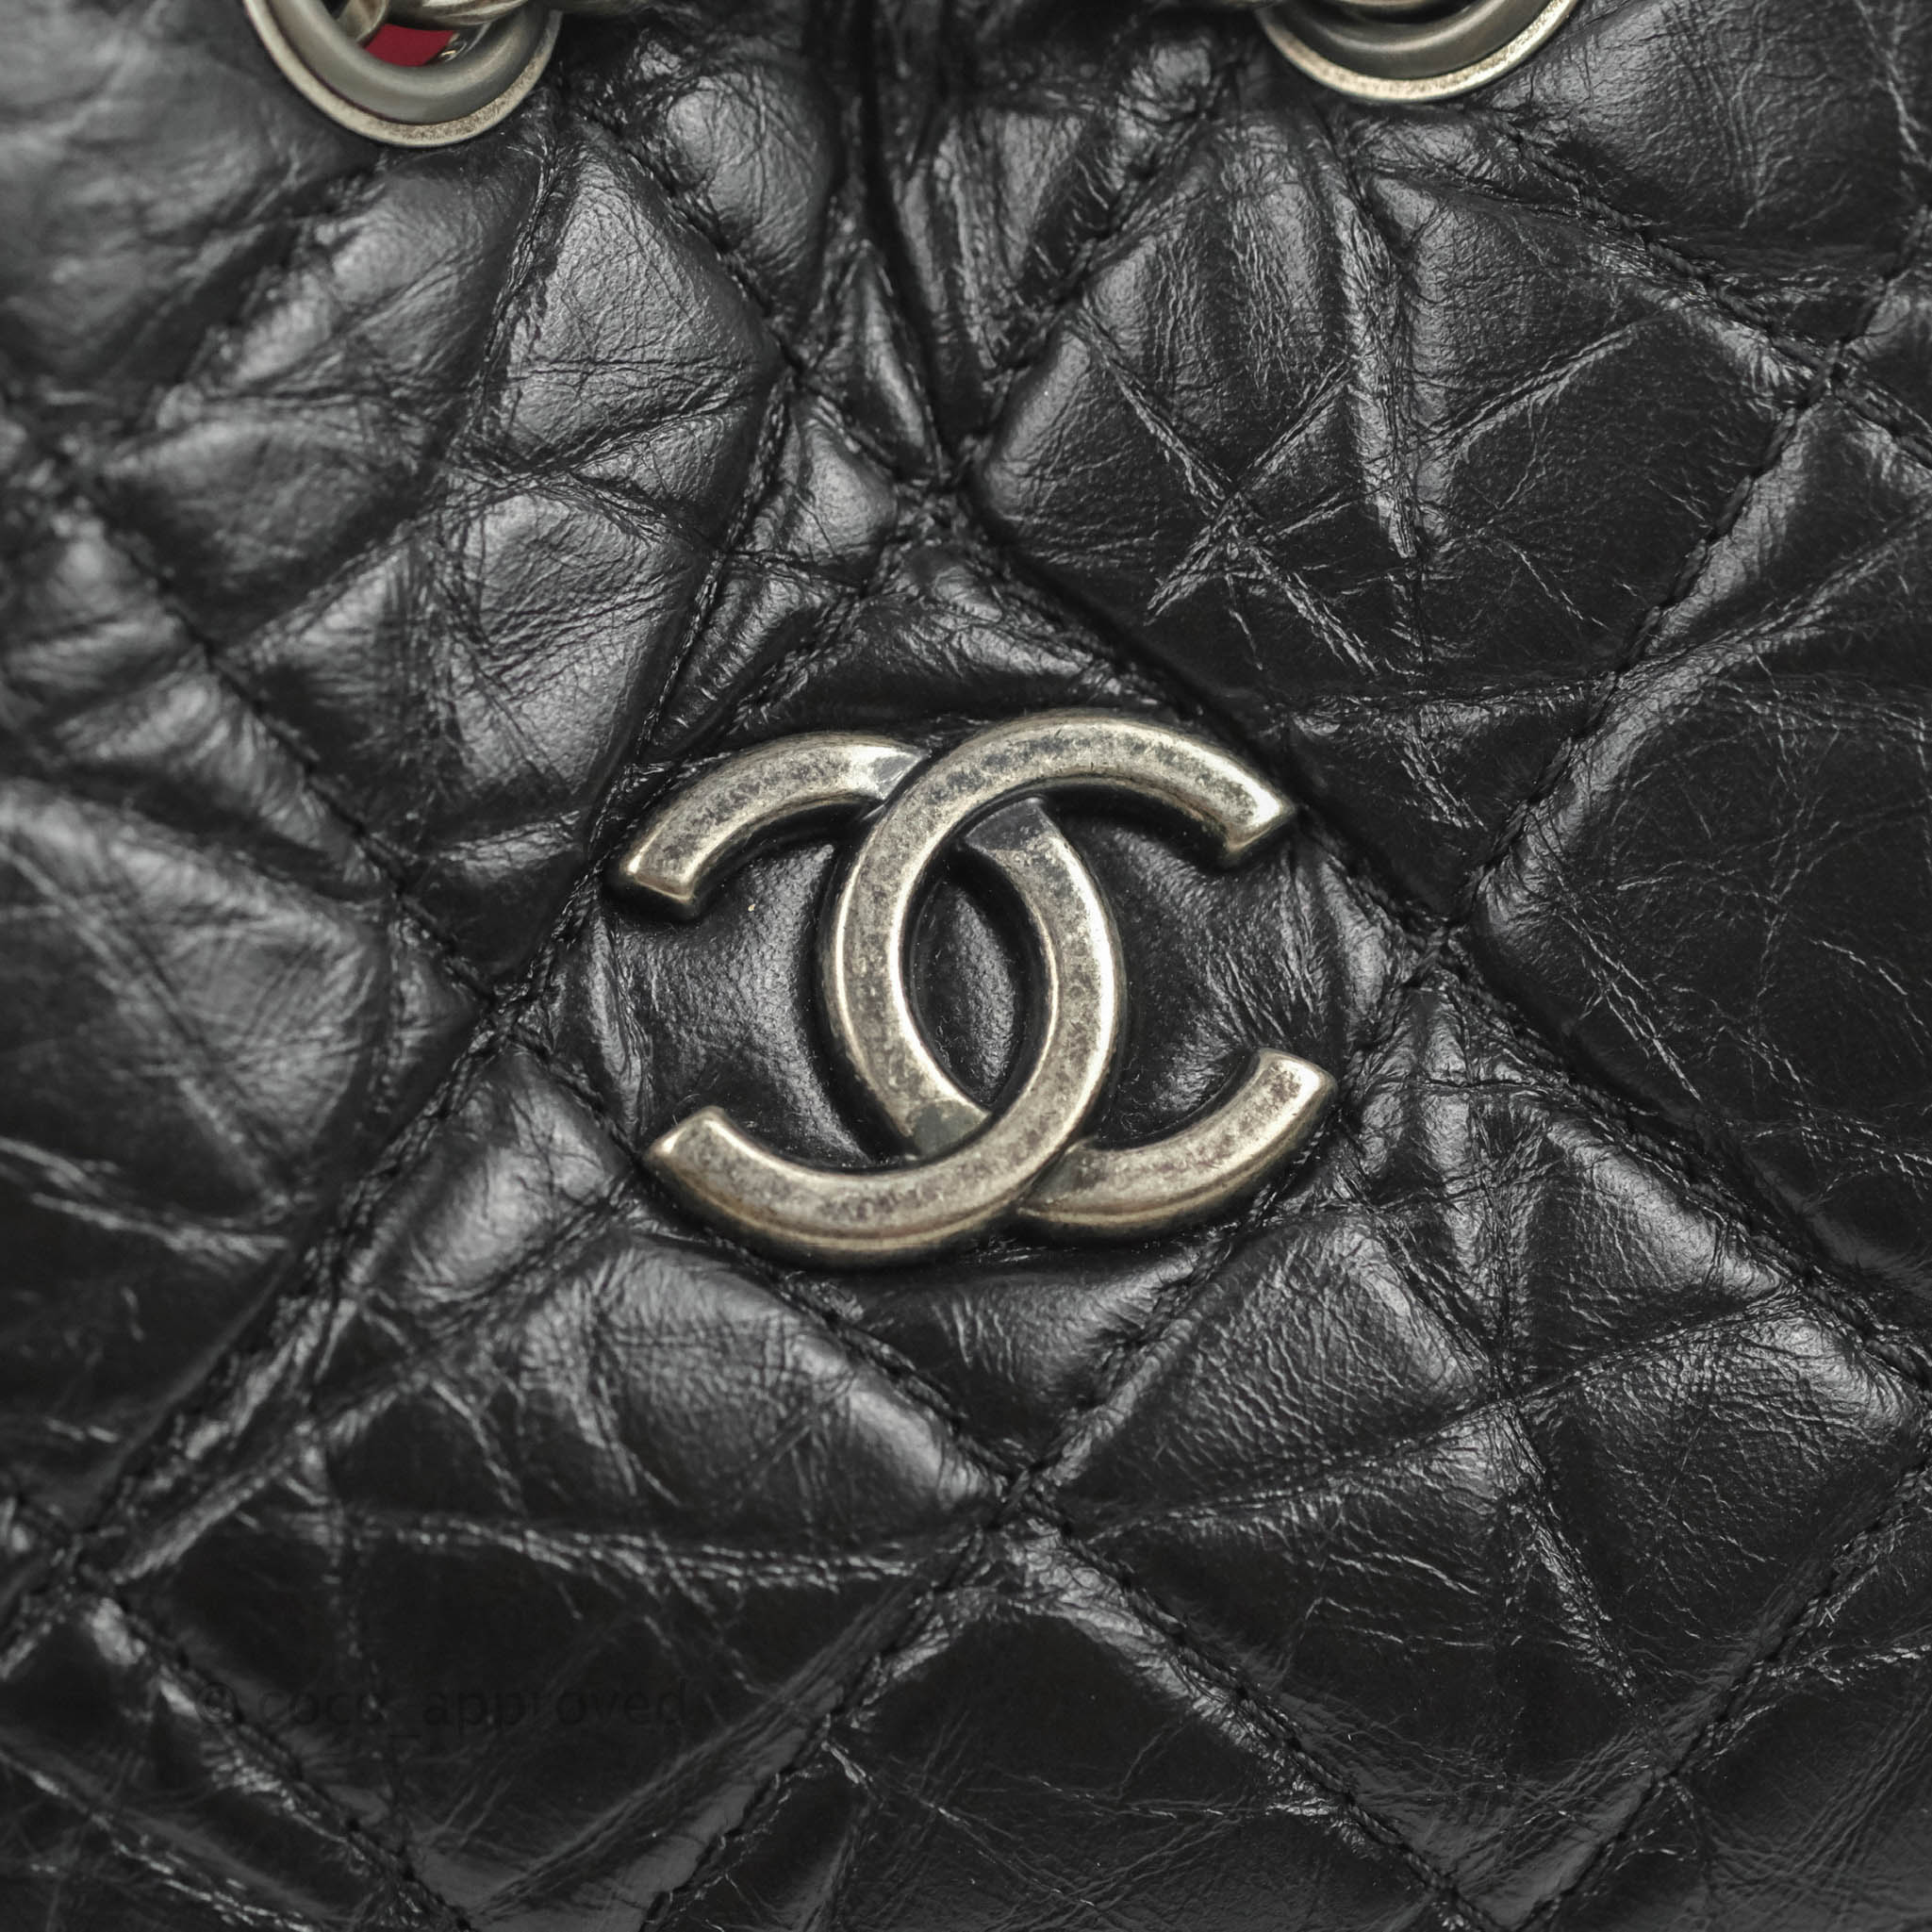 Chanel Small Gabrielle Backpack Black Aged Calfskin – Coco Approved Studio